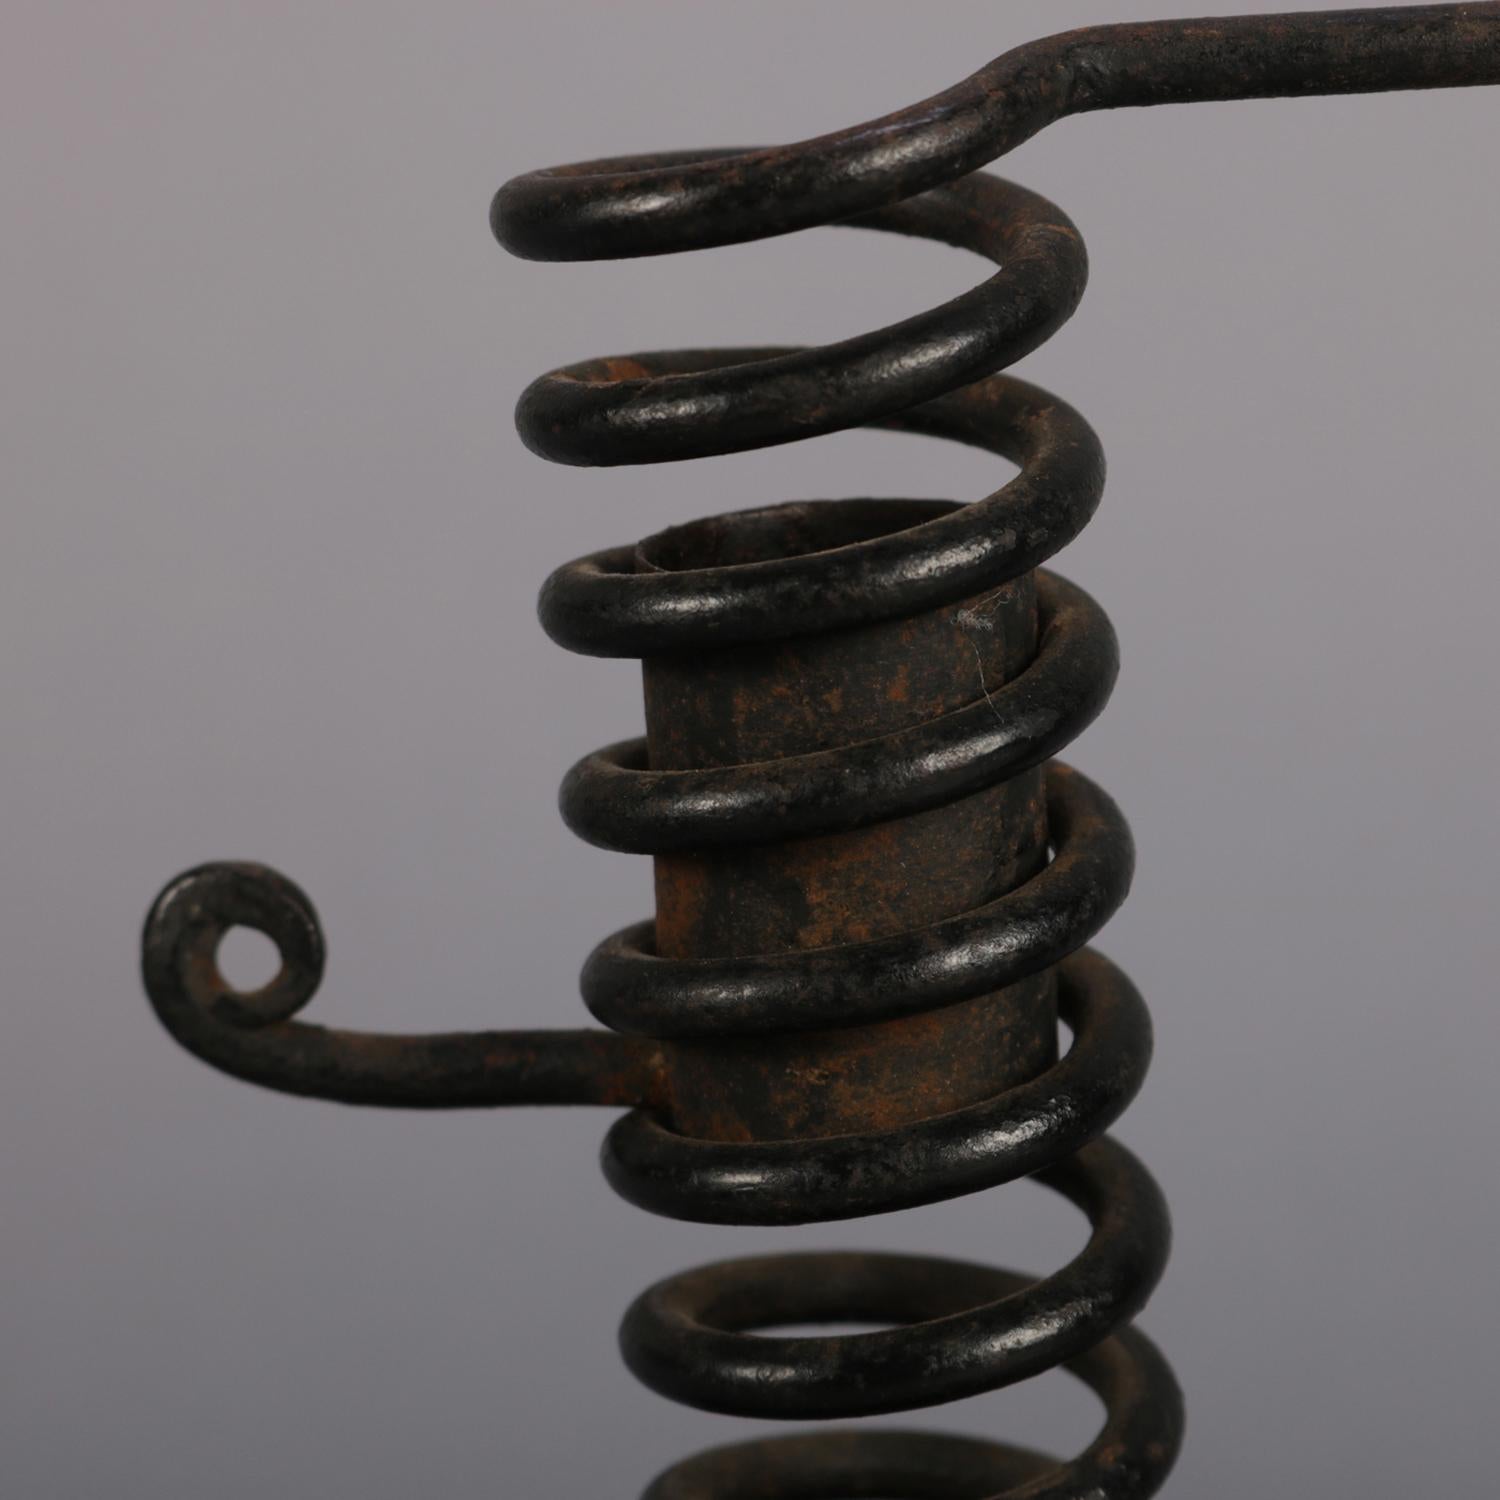 American Pair of Antique Wrought Iron Hand Held Spiral Courting Candlesticks, circa 1830